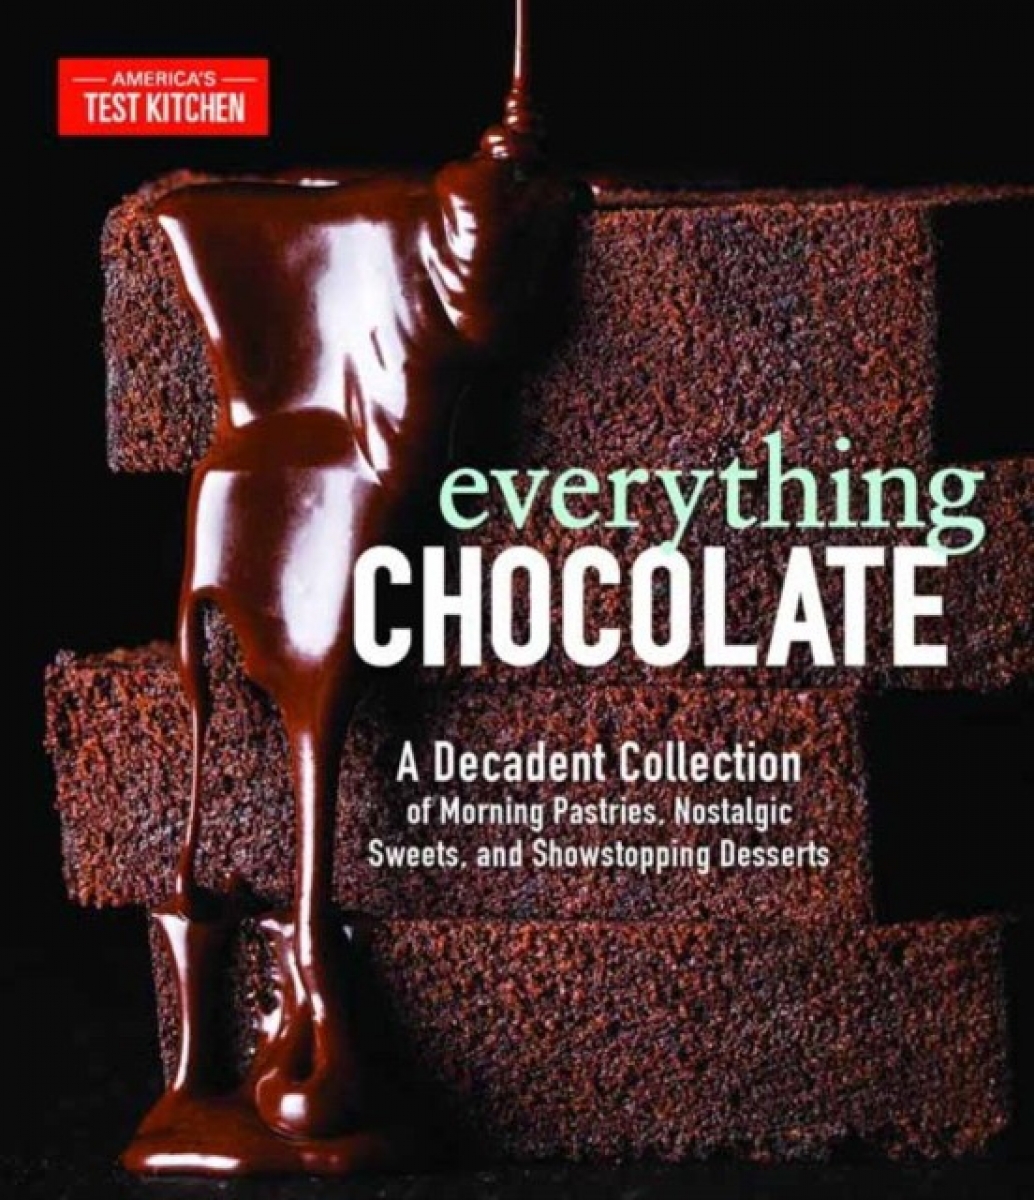 America's Test Kitchen Everything Chocolate: A Decadent Collection of Morning Pastries, Nostalgic Sweets, and Showstopping Desserts 